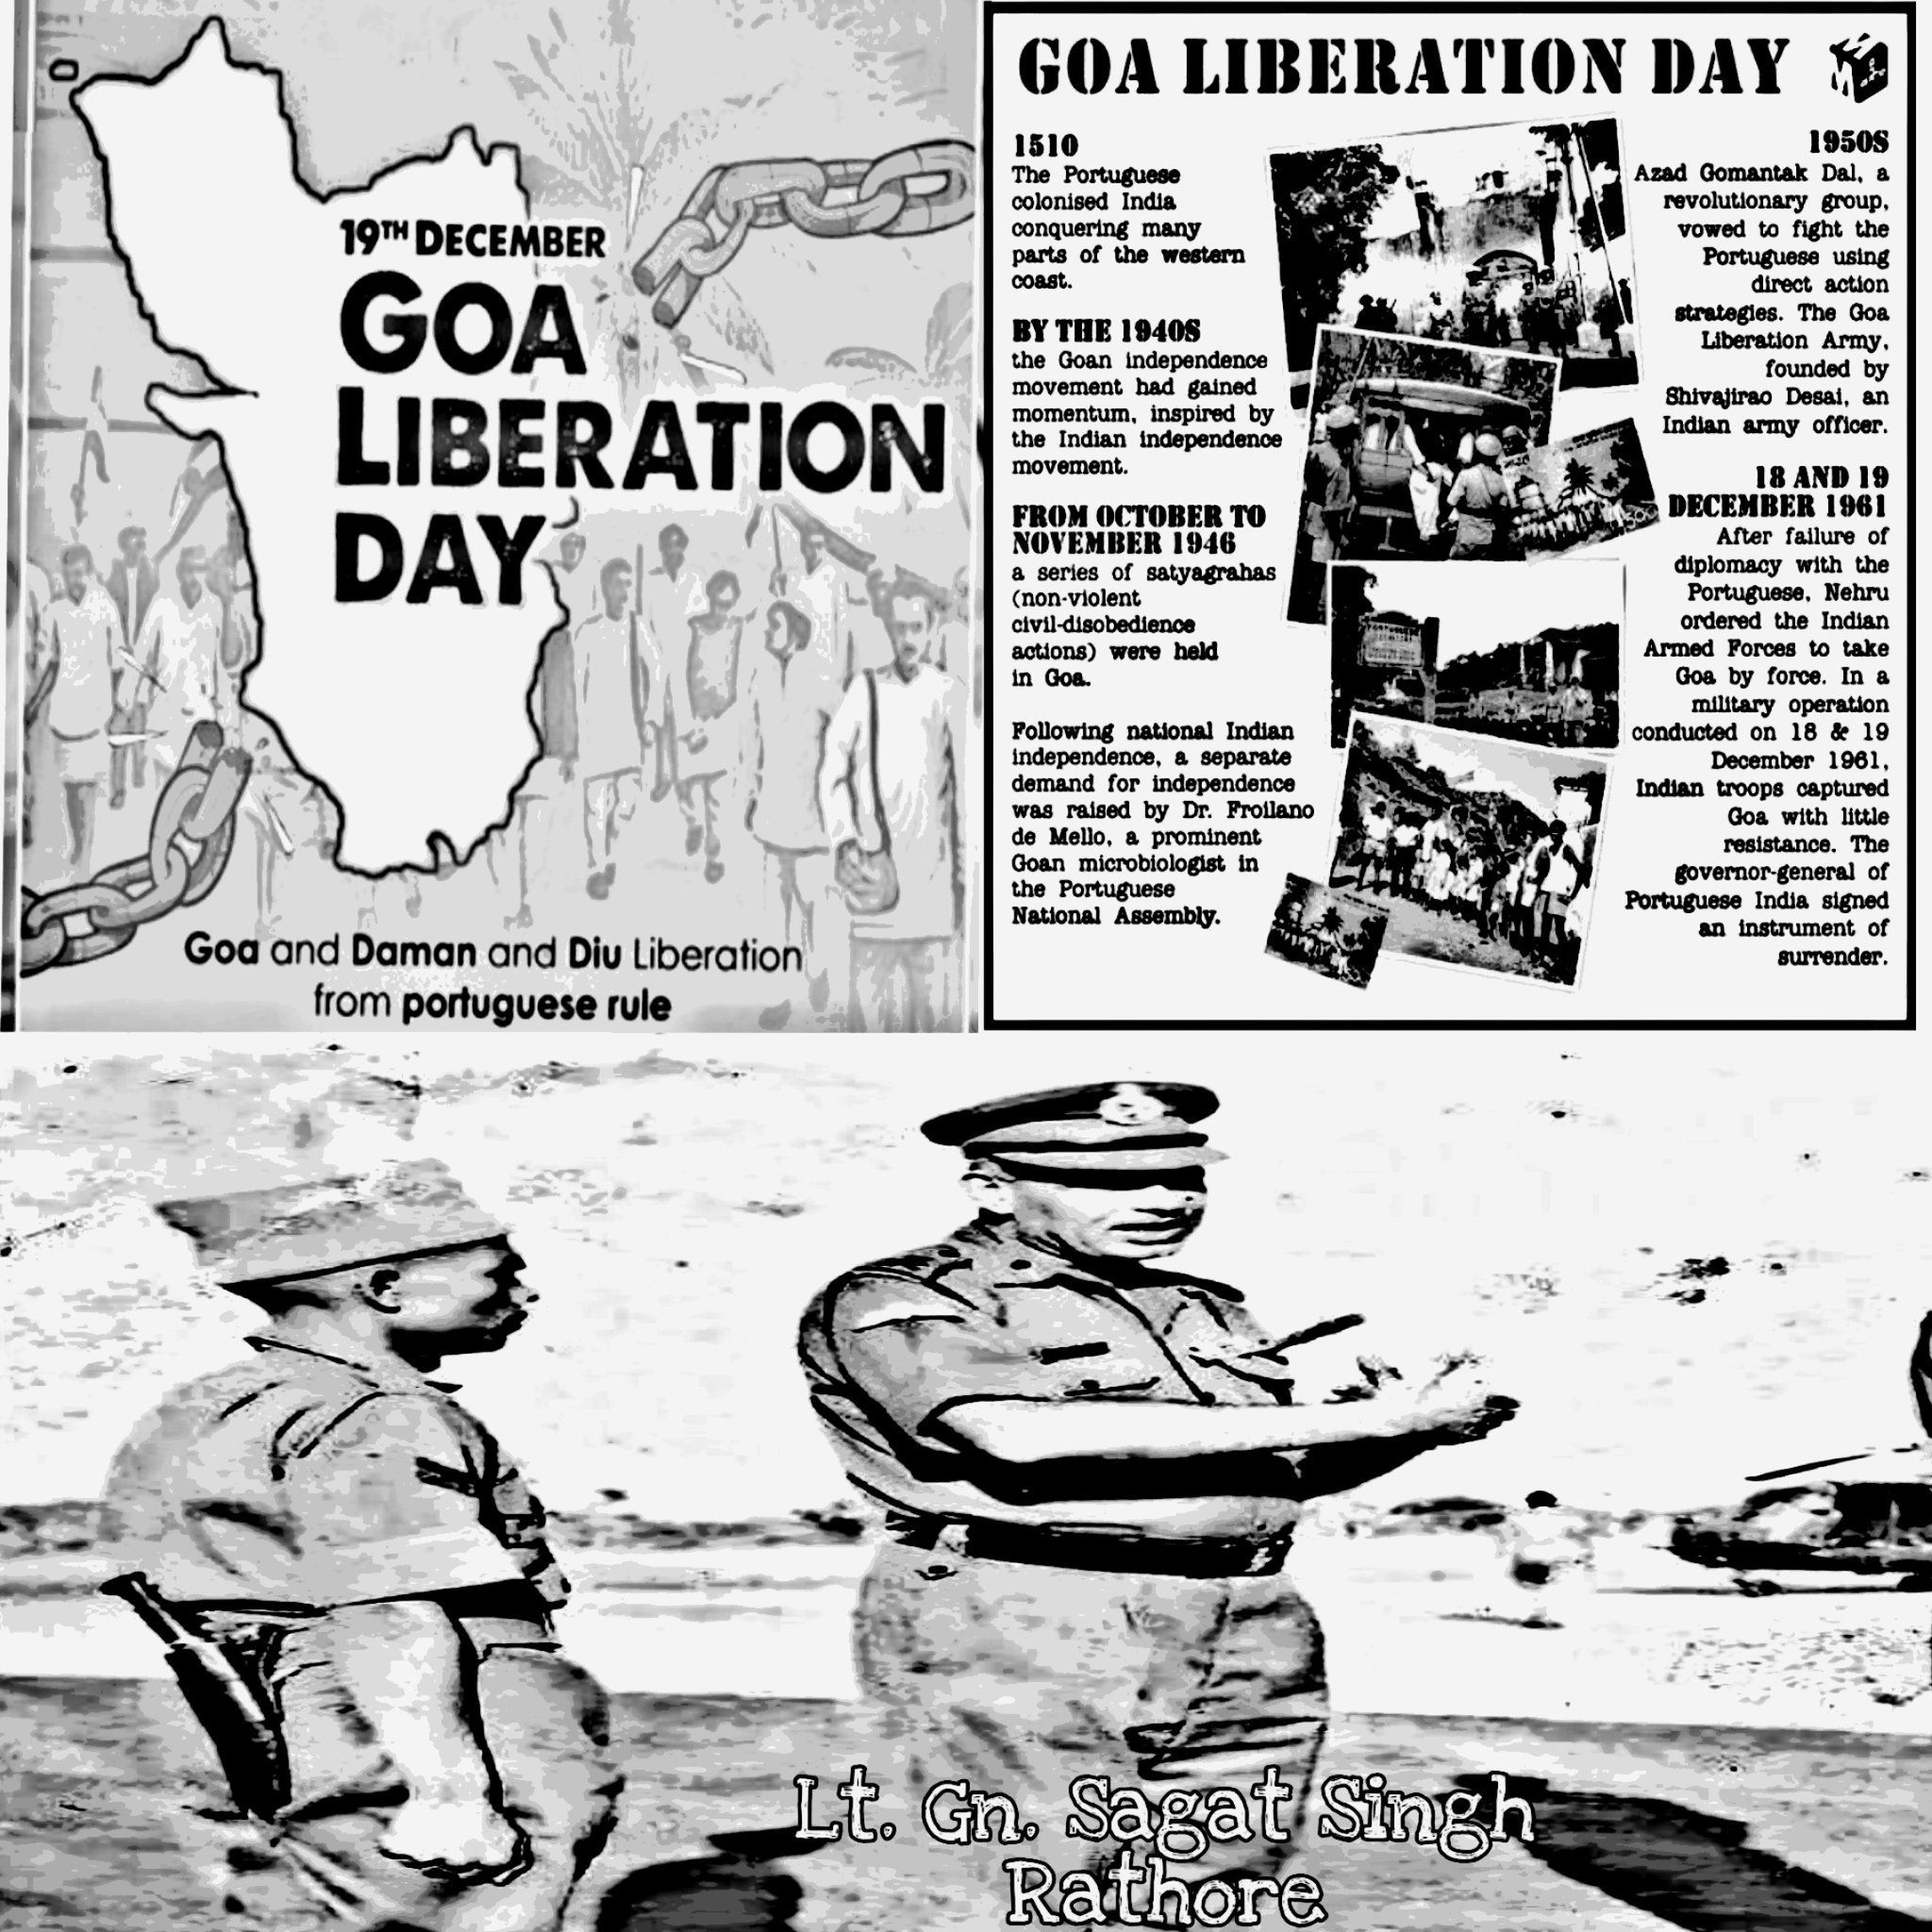 Herald: On Liberation Day eve, Guv hails State's fight against COVID-19